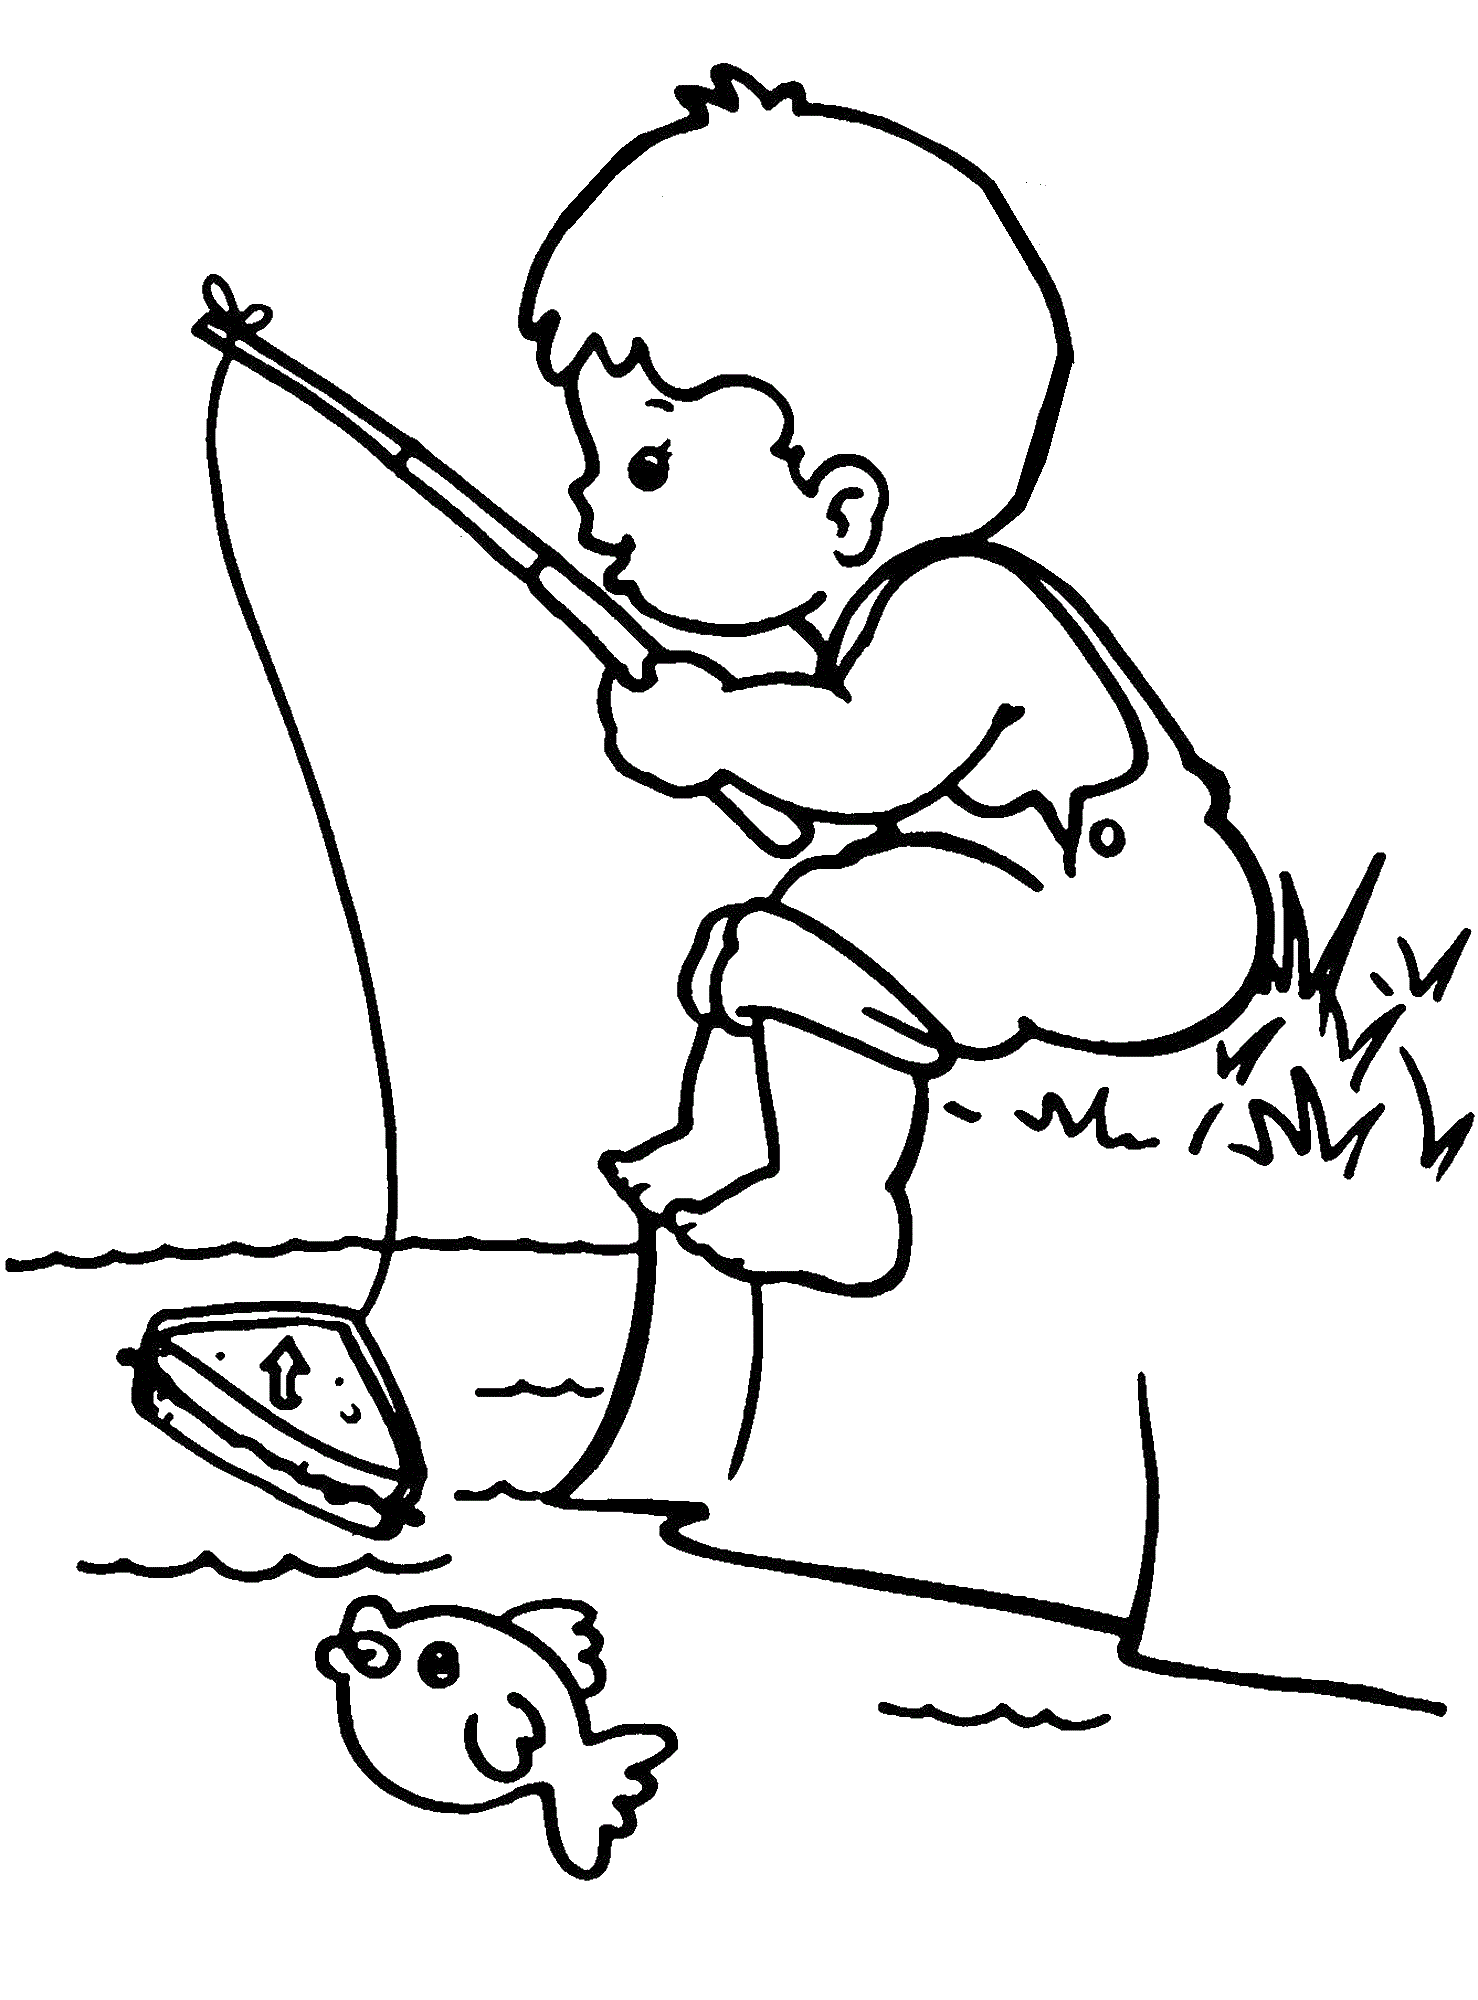 Boys Fishing Coloring Pages For Kids #bHY : Printable Boys ...